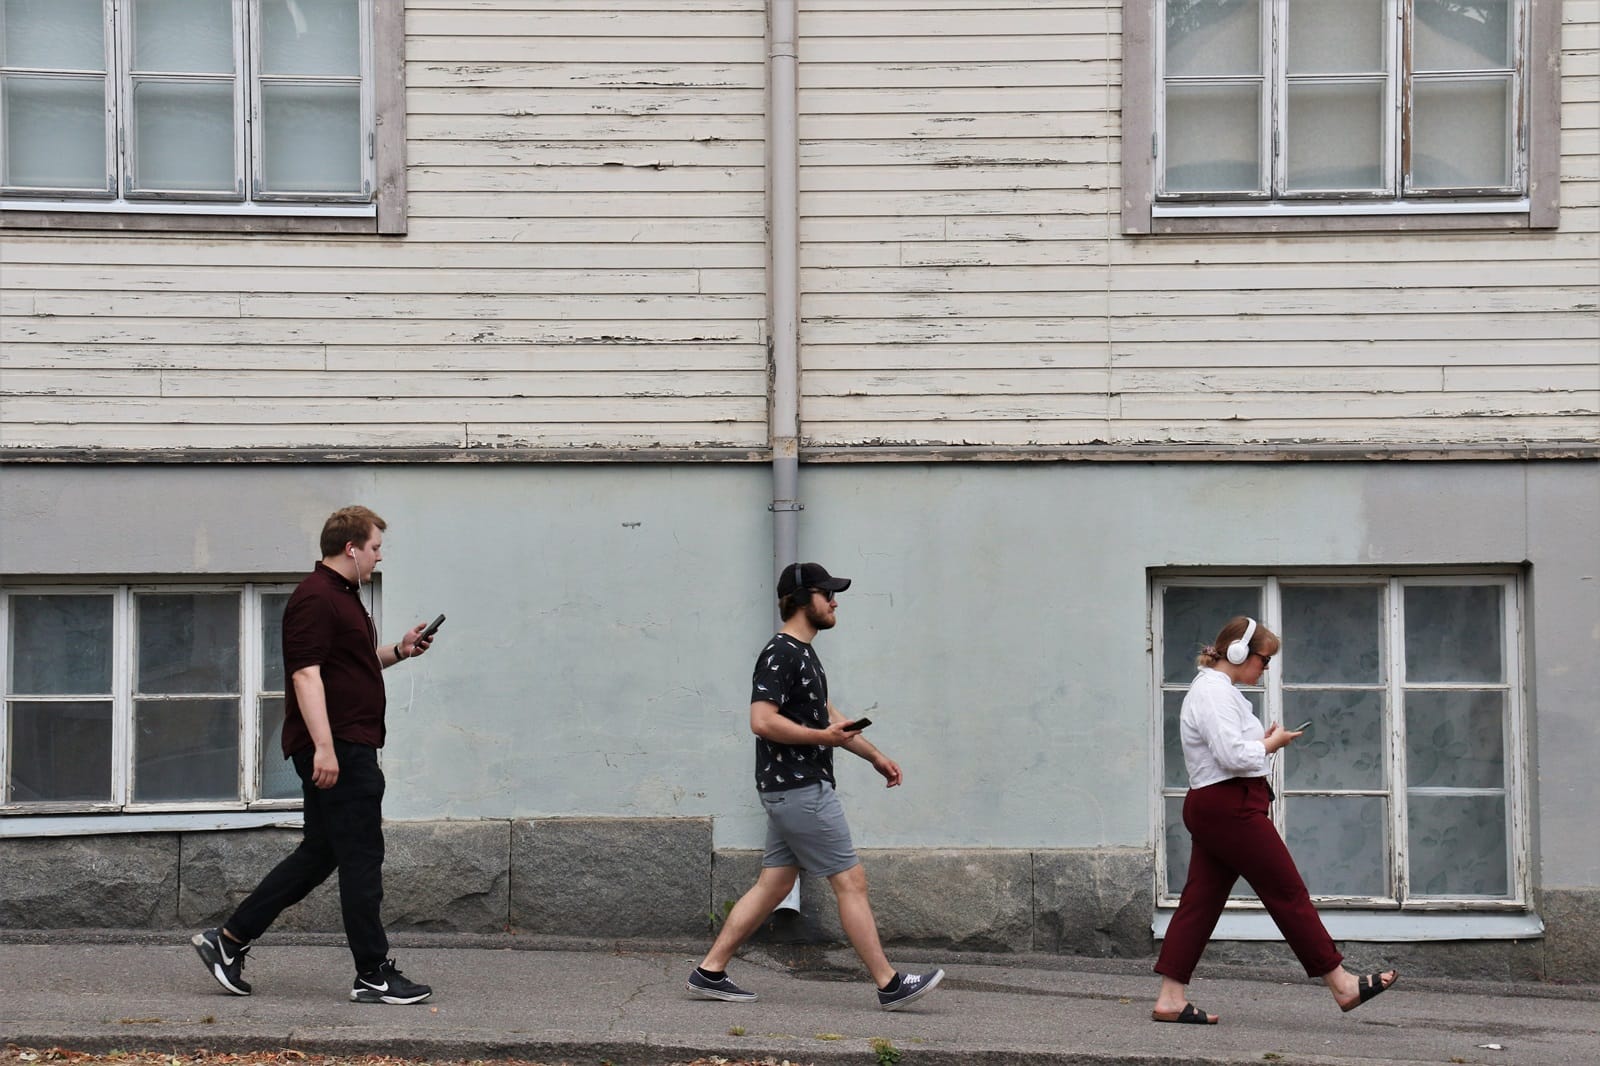 Photo. Three persons walking in the citylike environment.